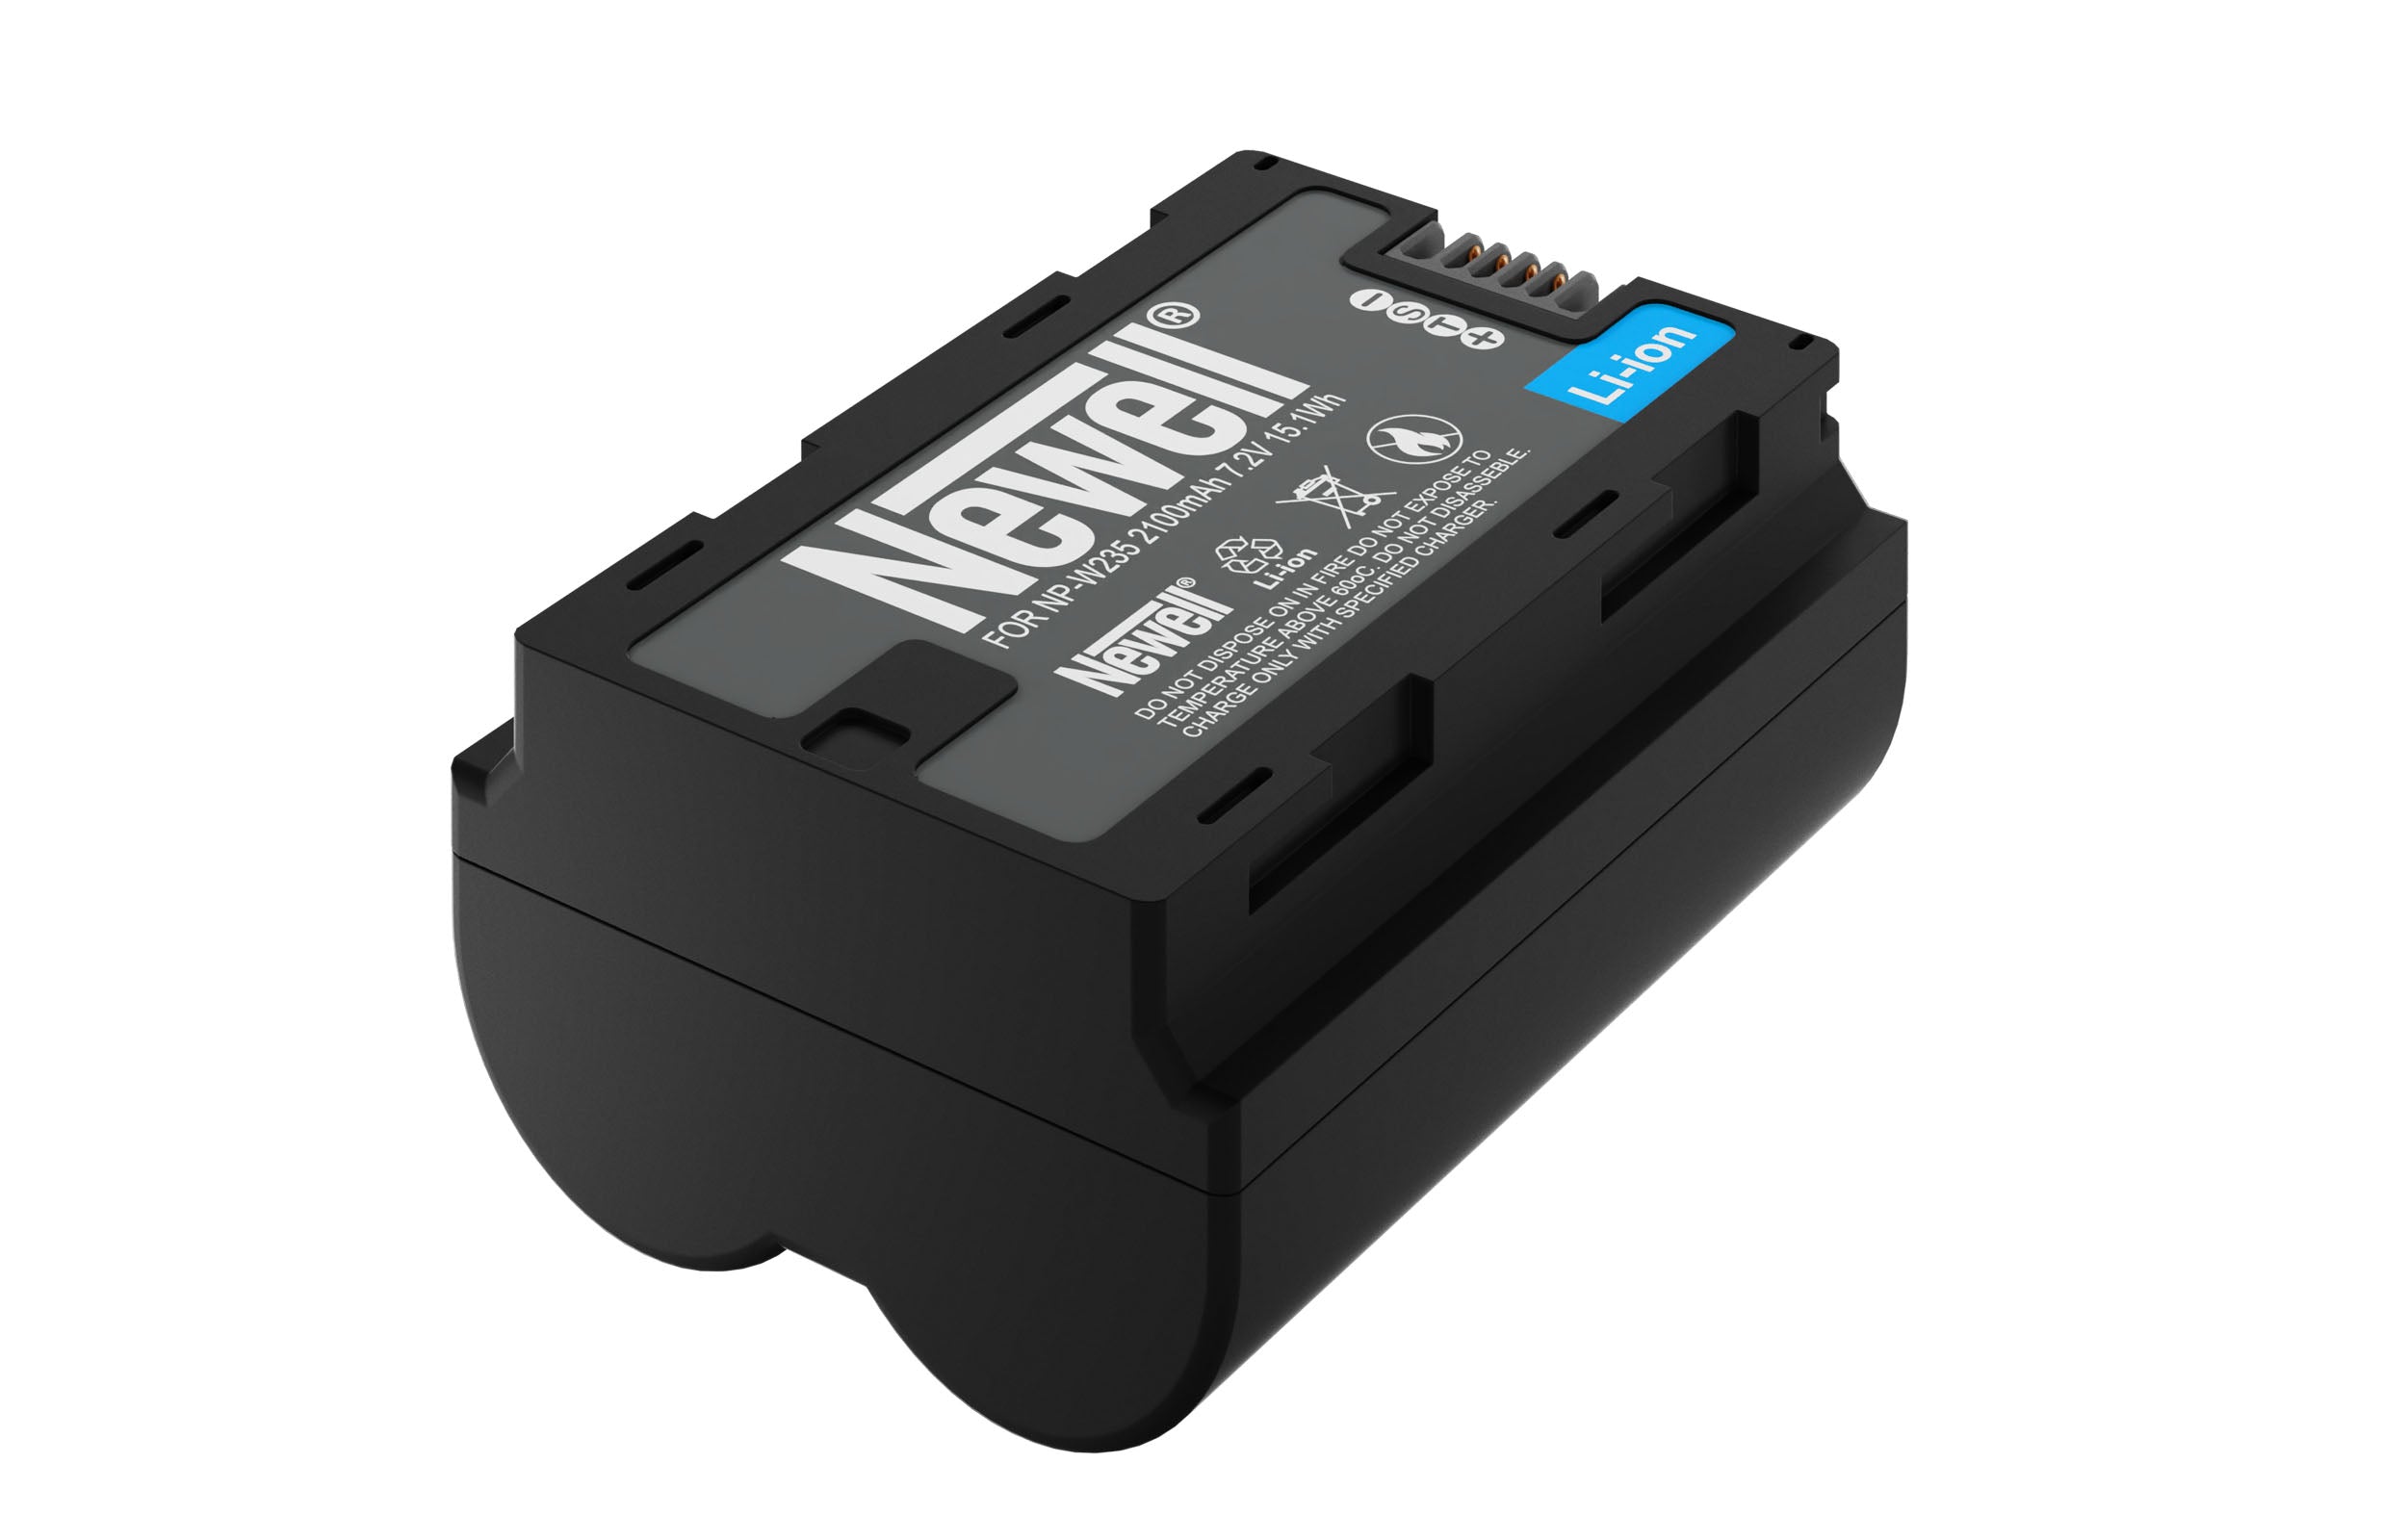 Batterie rechargeable Newell NP-W235